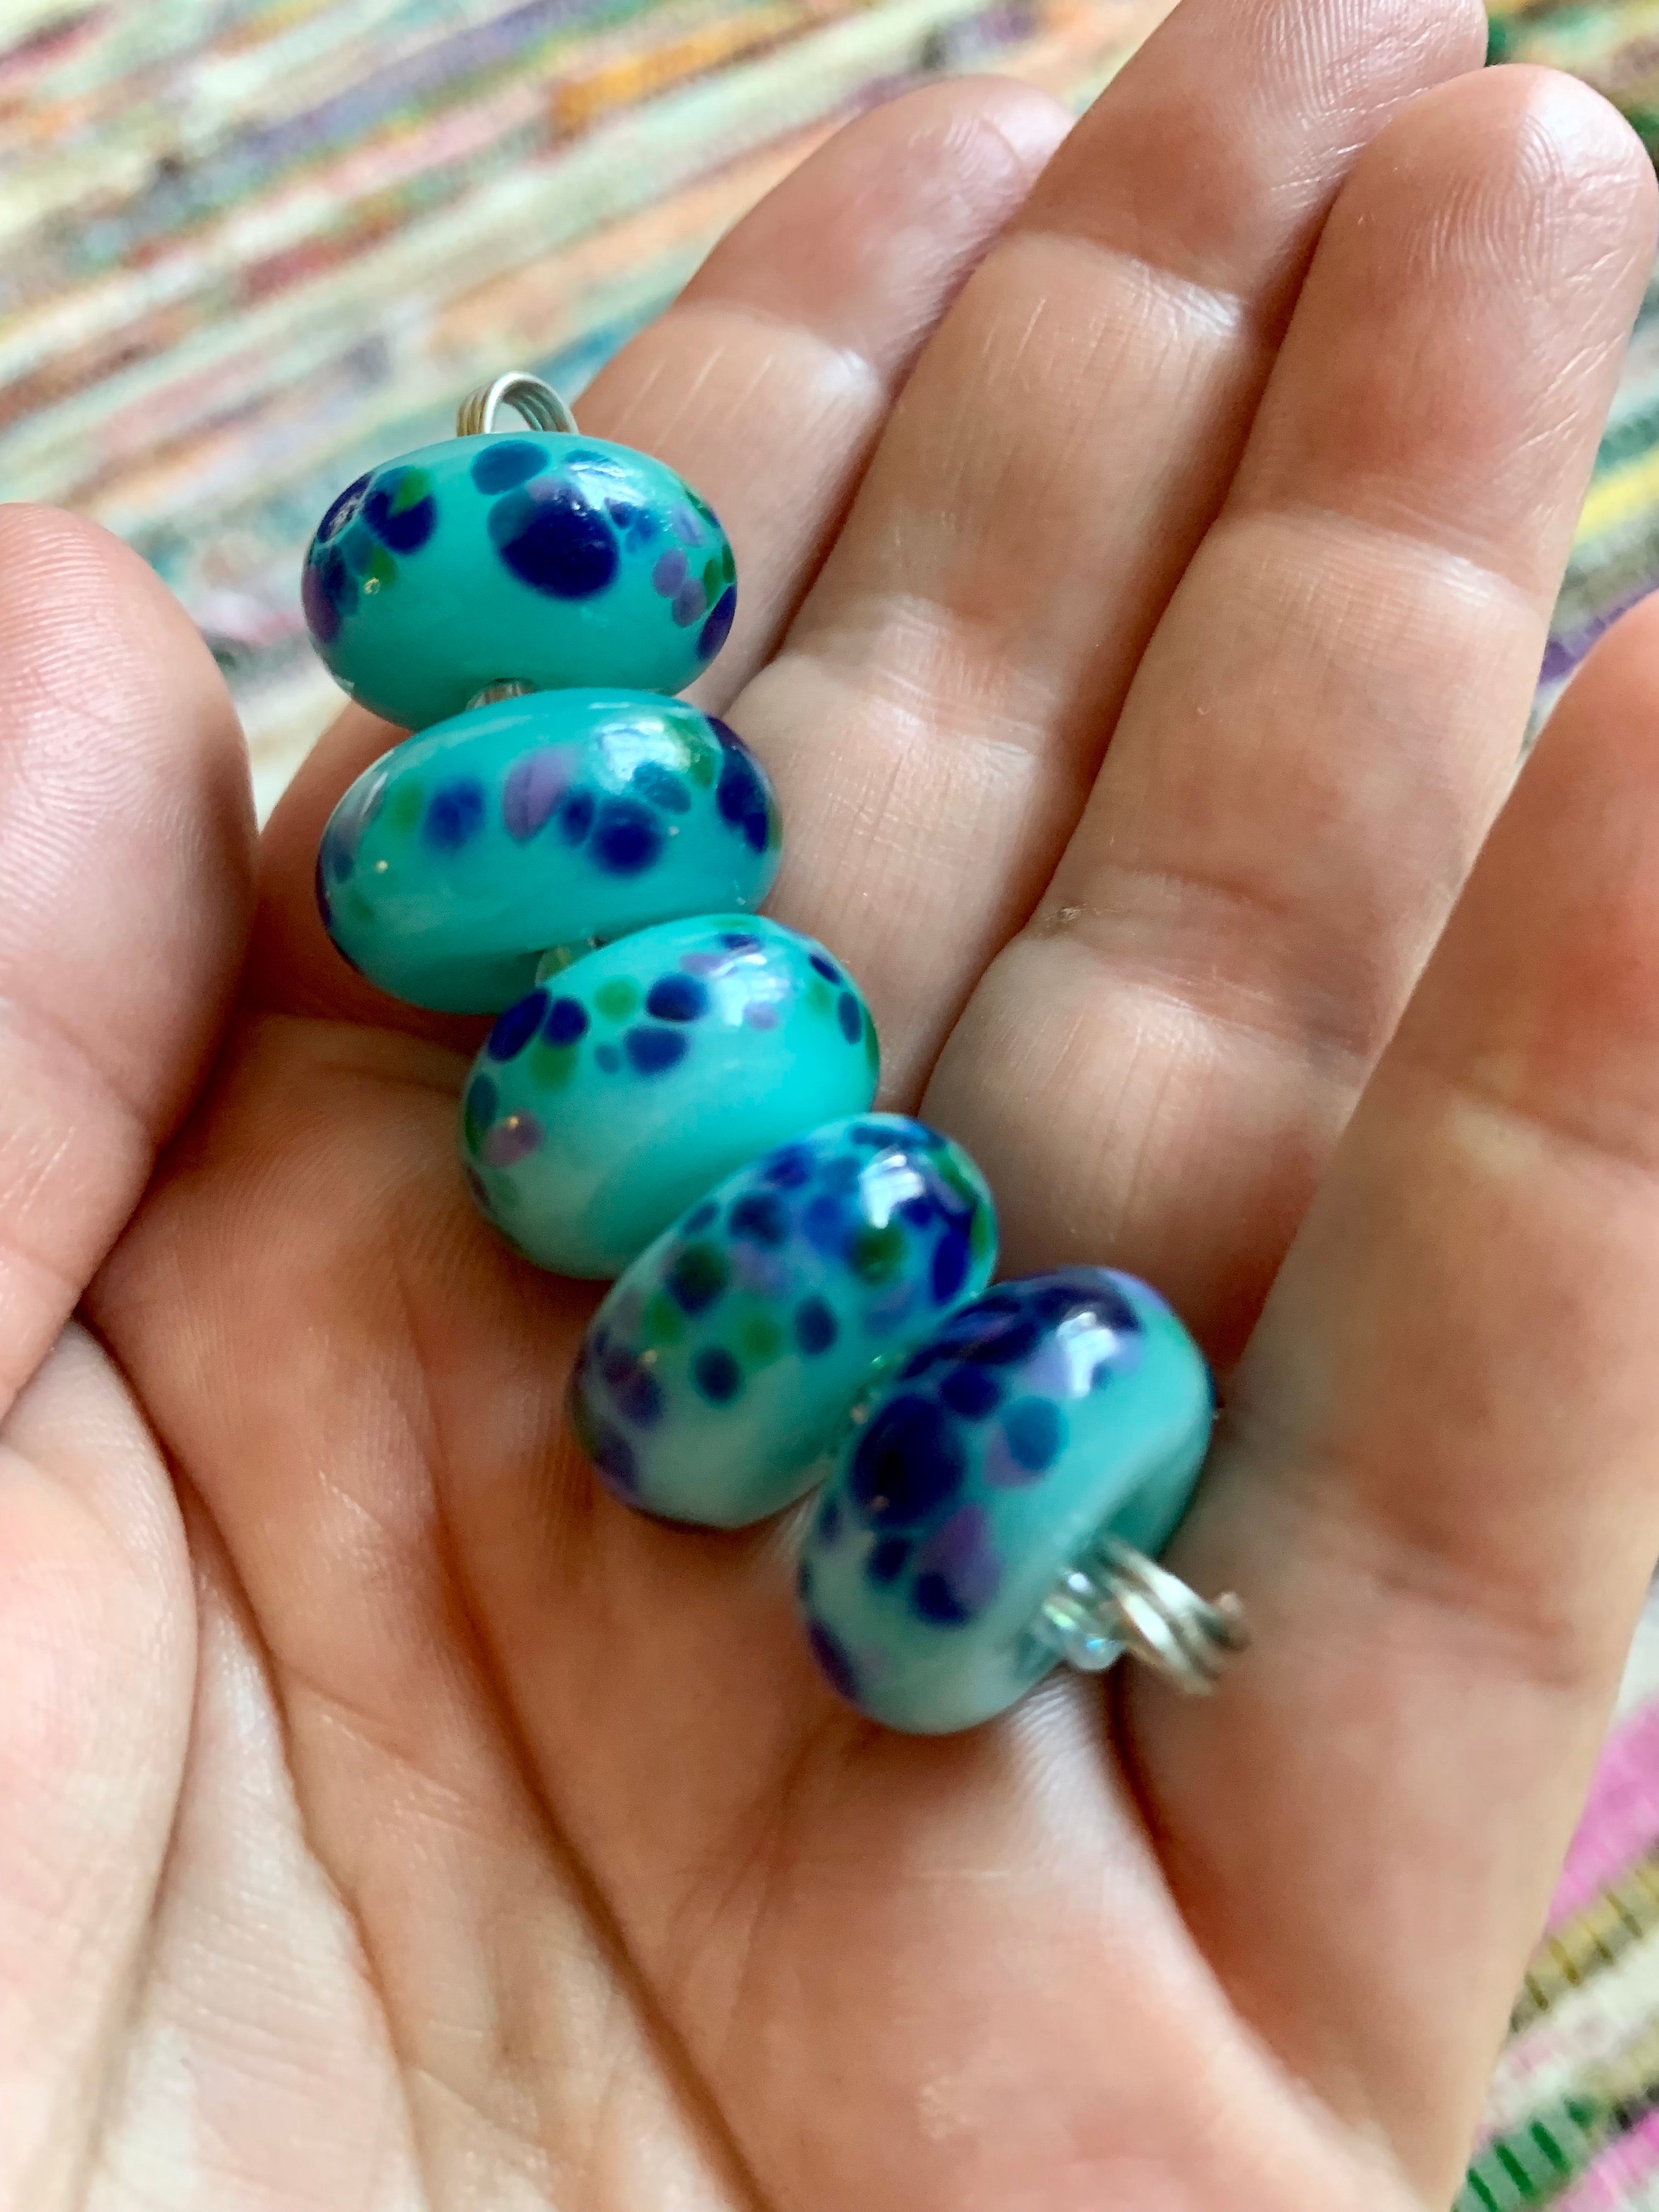 Set of 5 Handcrafted Lampwork Glass Beads light aqua blue with blue speckled